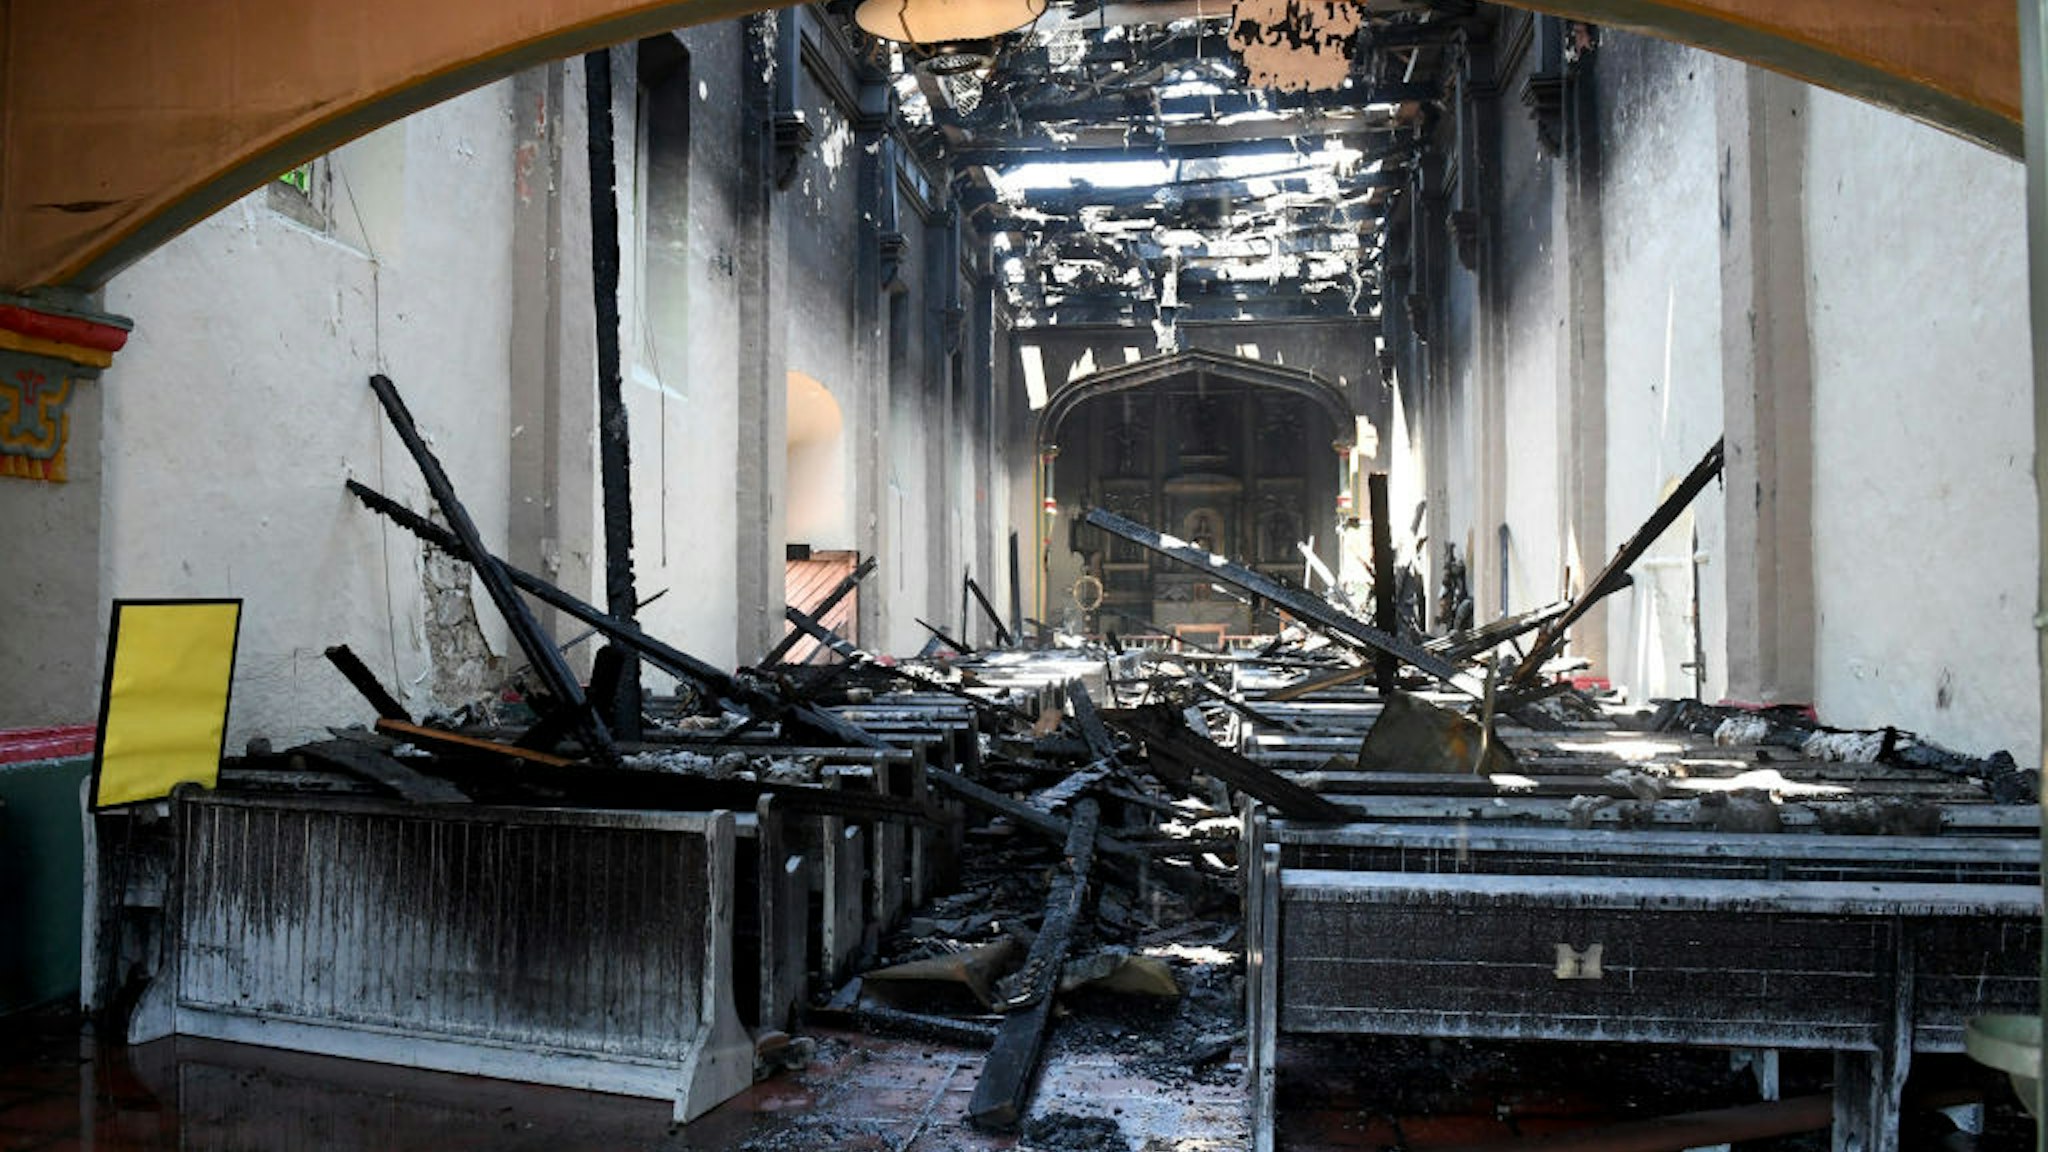 The inside of the church after a four-alarm fire tore through the church at Mission San Gabriel destroying the inside of the 245-year-old building in San Gabriel on Saturday, July 11, 2020.